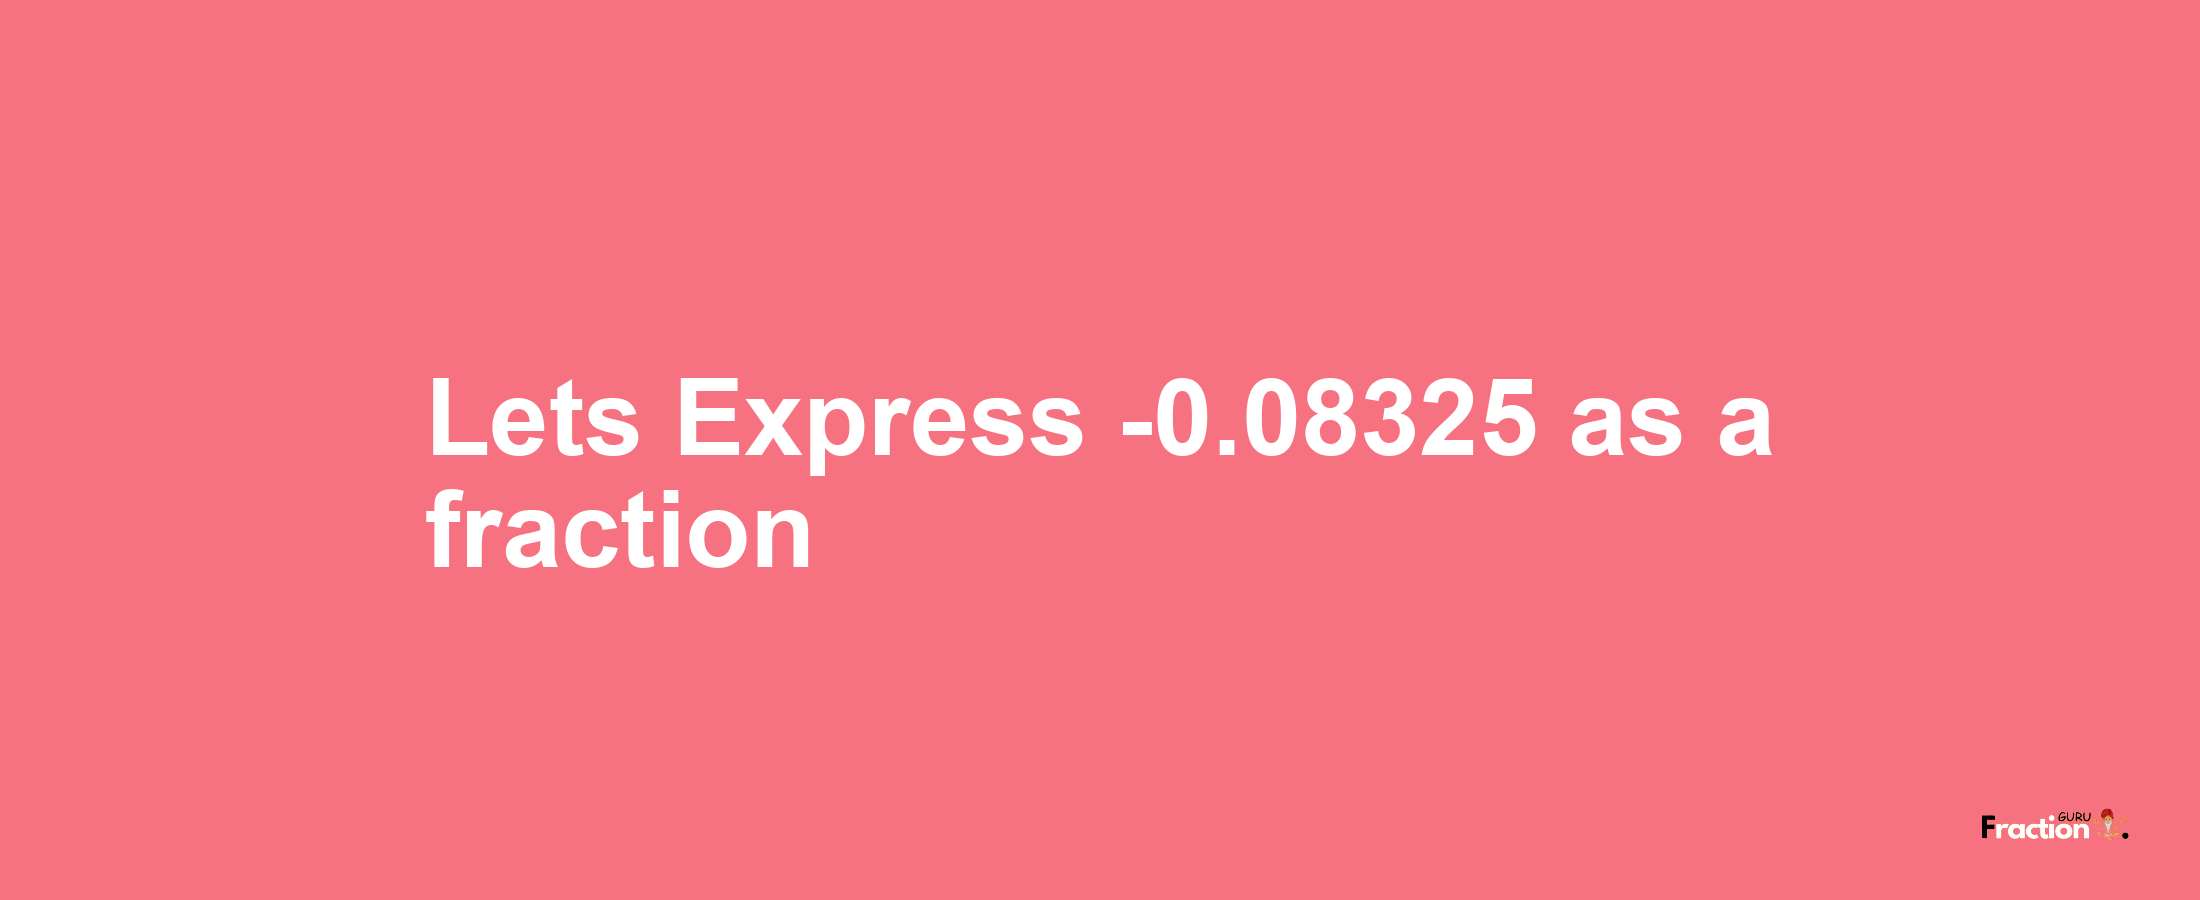 Lets Express -0.08325 as afraction